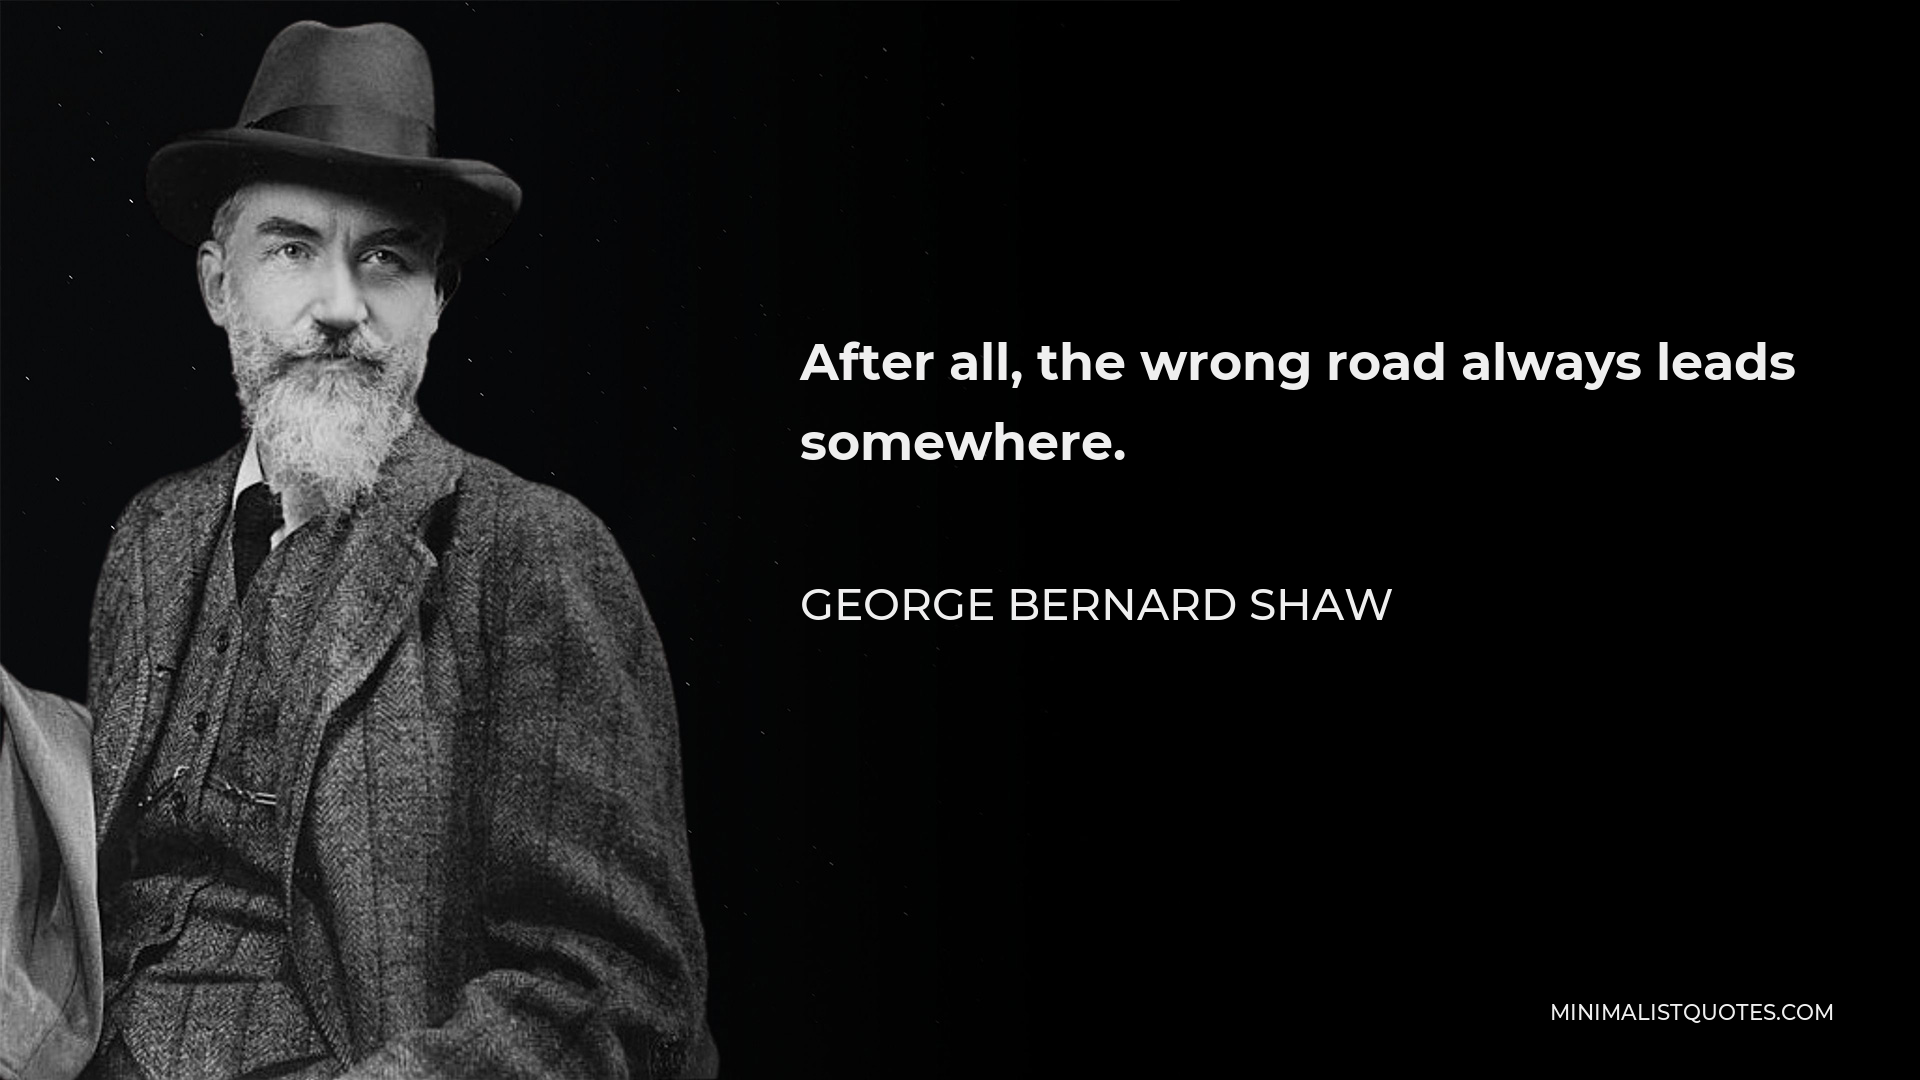 George Bernard Shaw Quote - After all, the wrong road always leads somewhere.